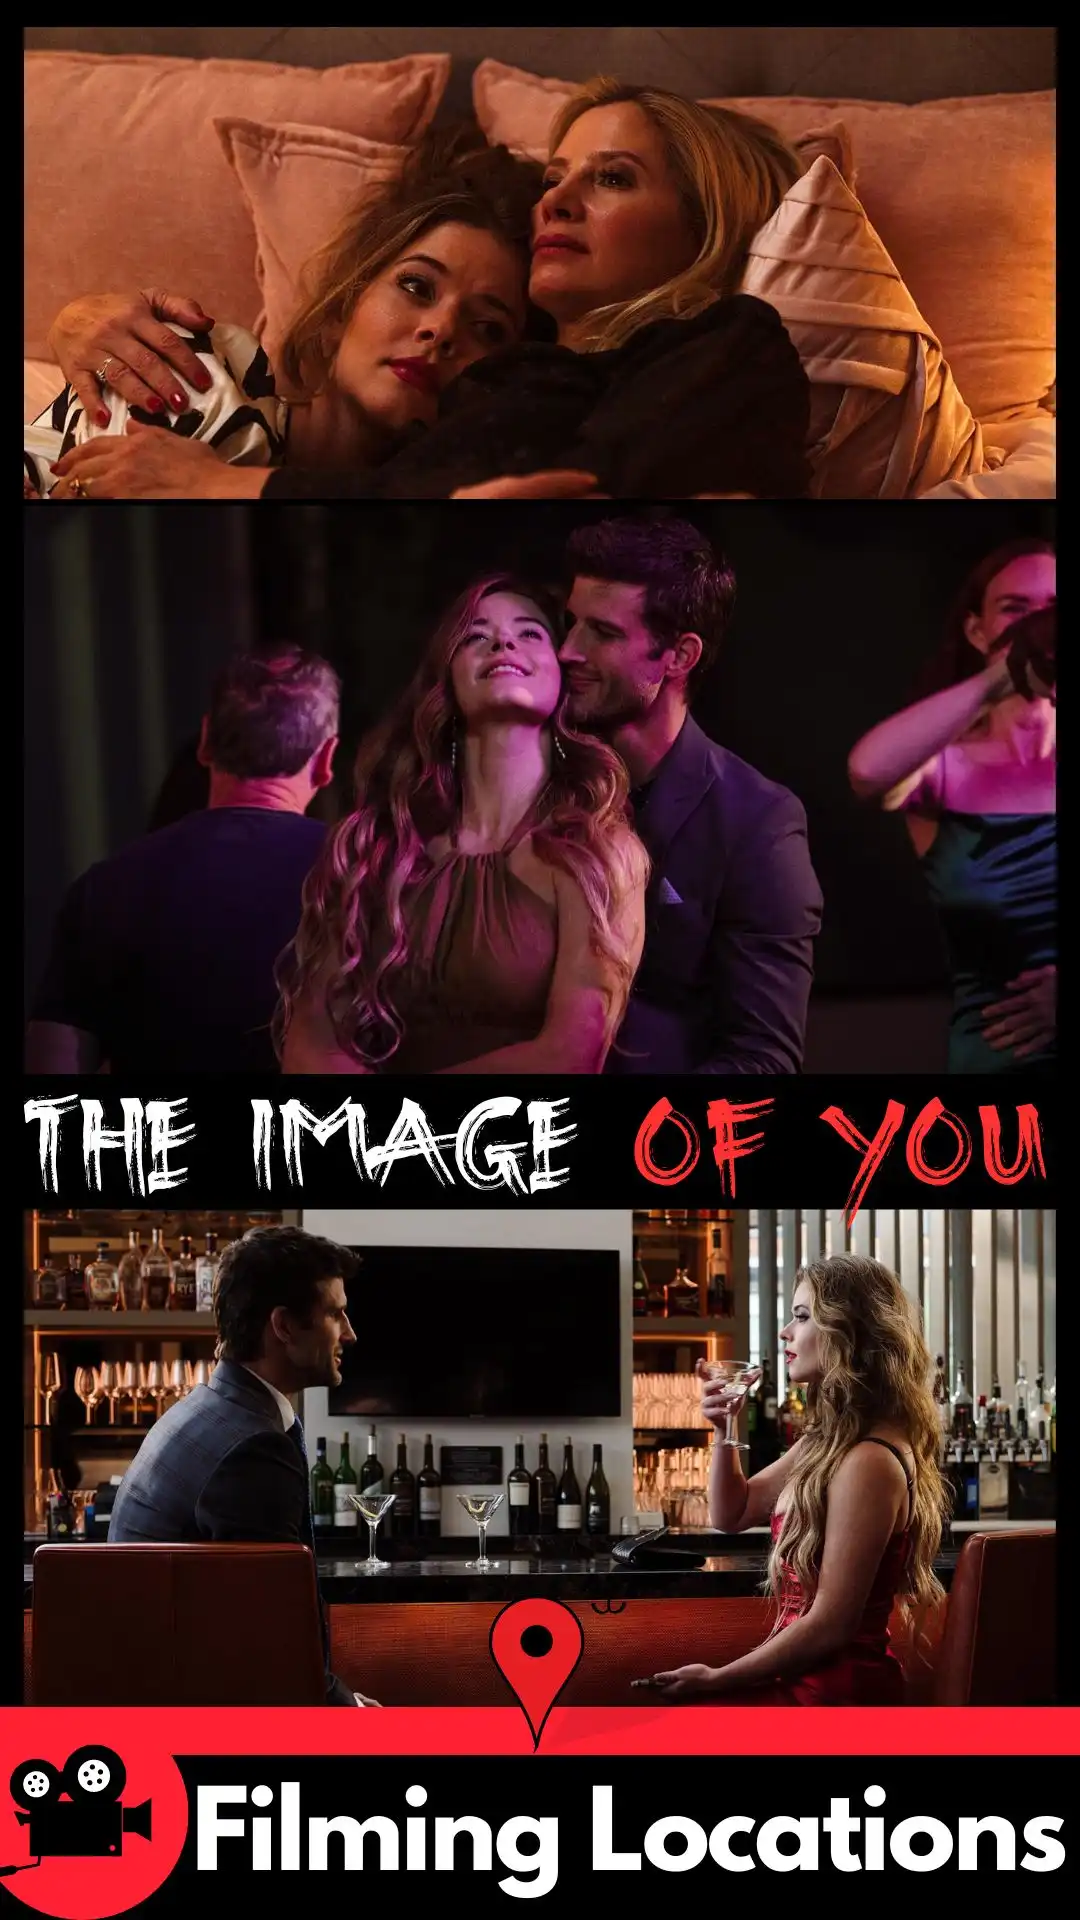 The Image of You Filming Locations